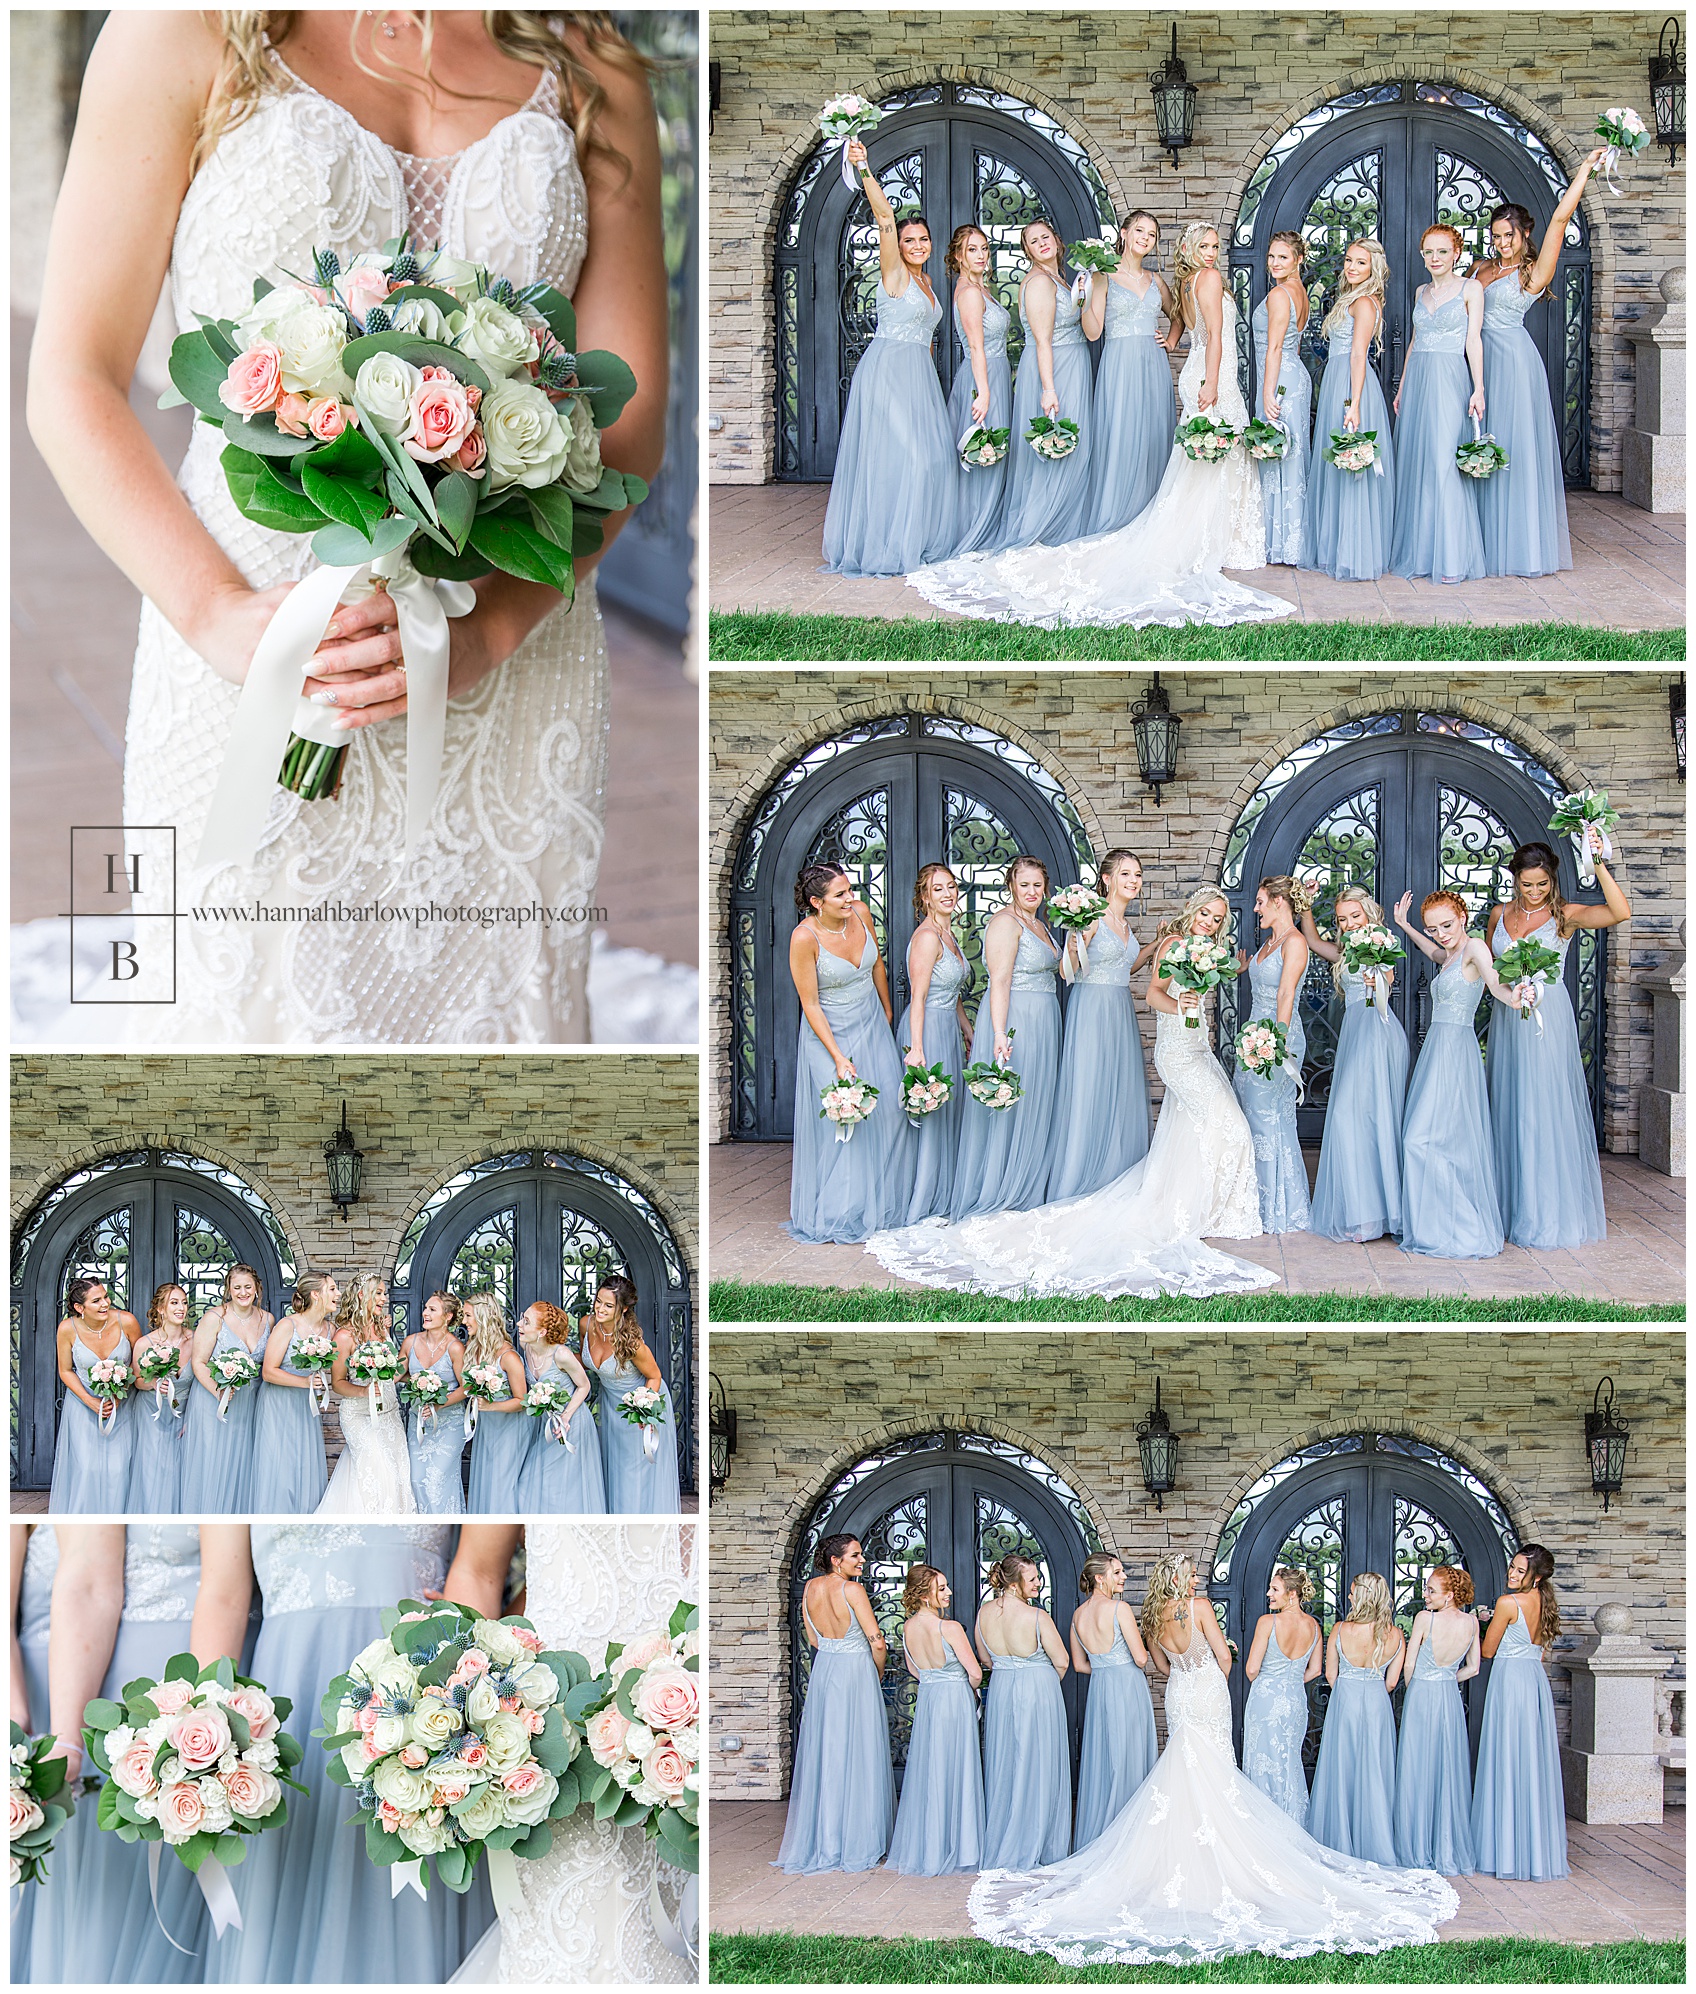 Bridesmaids Wearing Light Blue Dresses at Bella Amore in Dennison Ohio for Summer Wedding